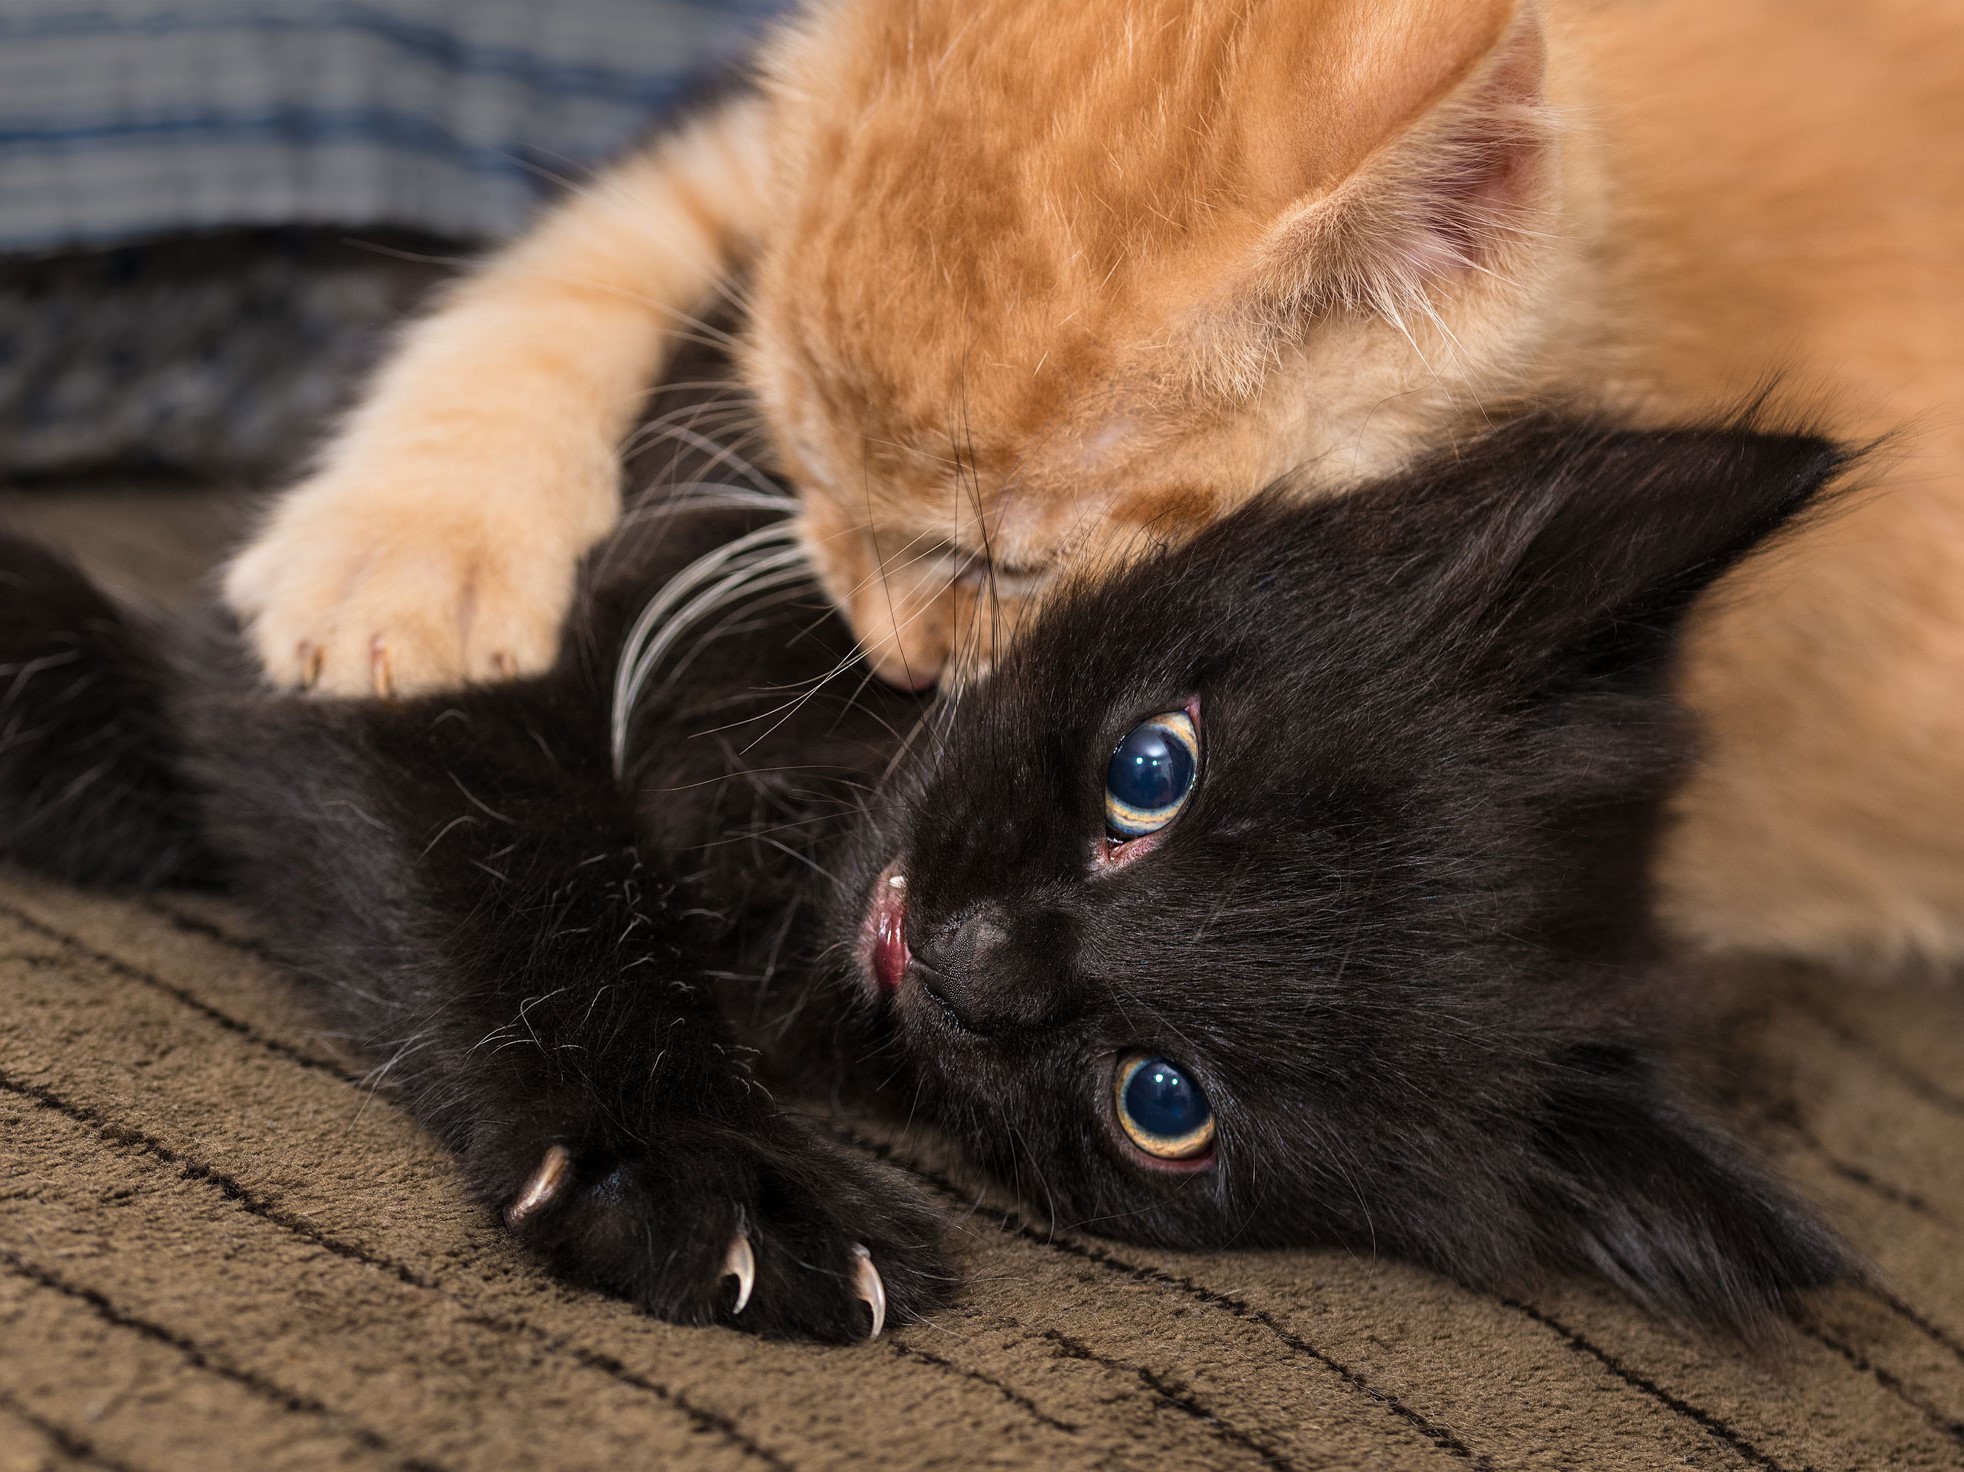 Two young cats playing and wrestling, one biting the other